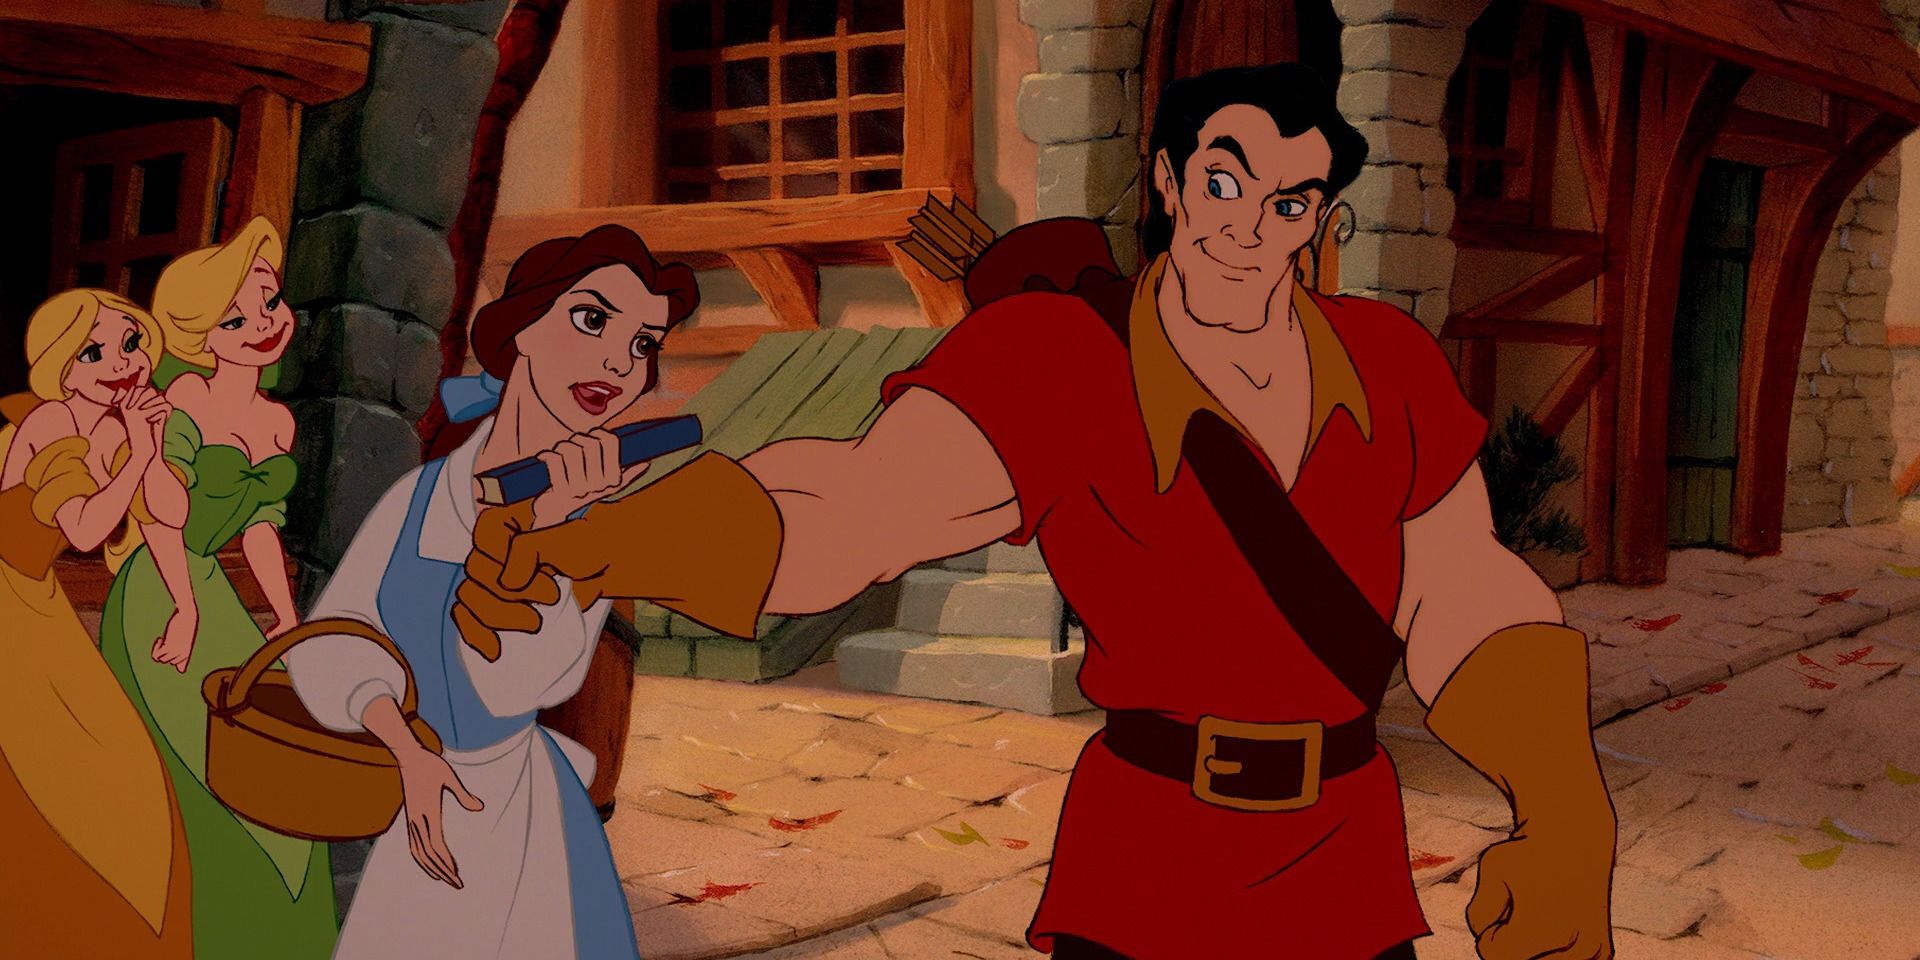 Belle with Gaston in the street in Beauty and the Beast